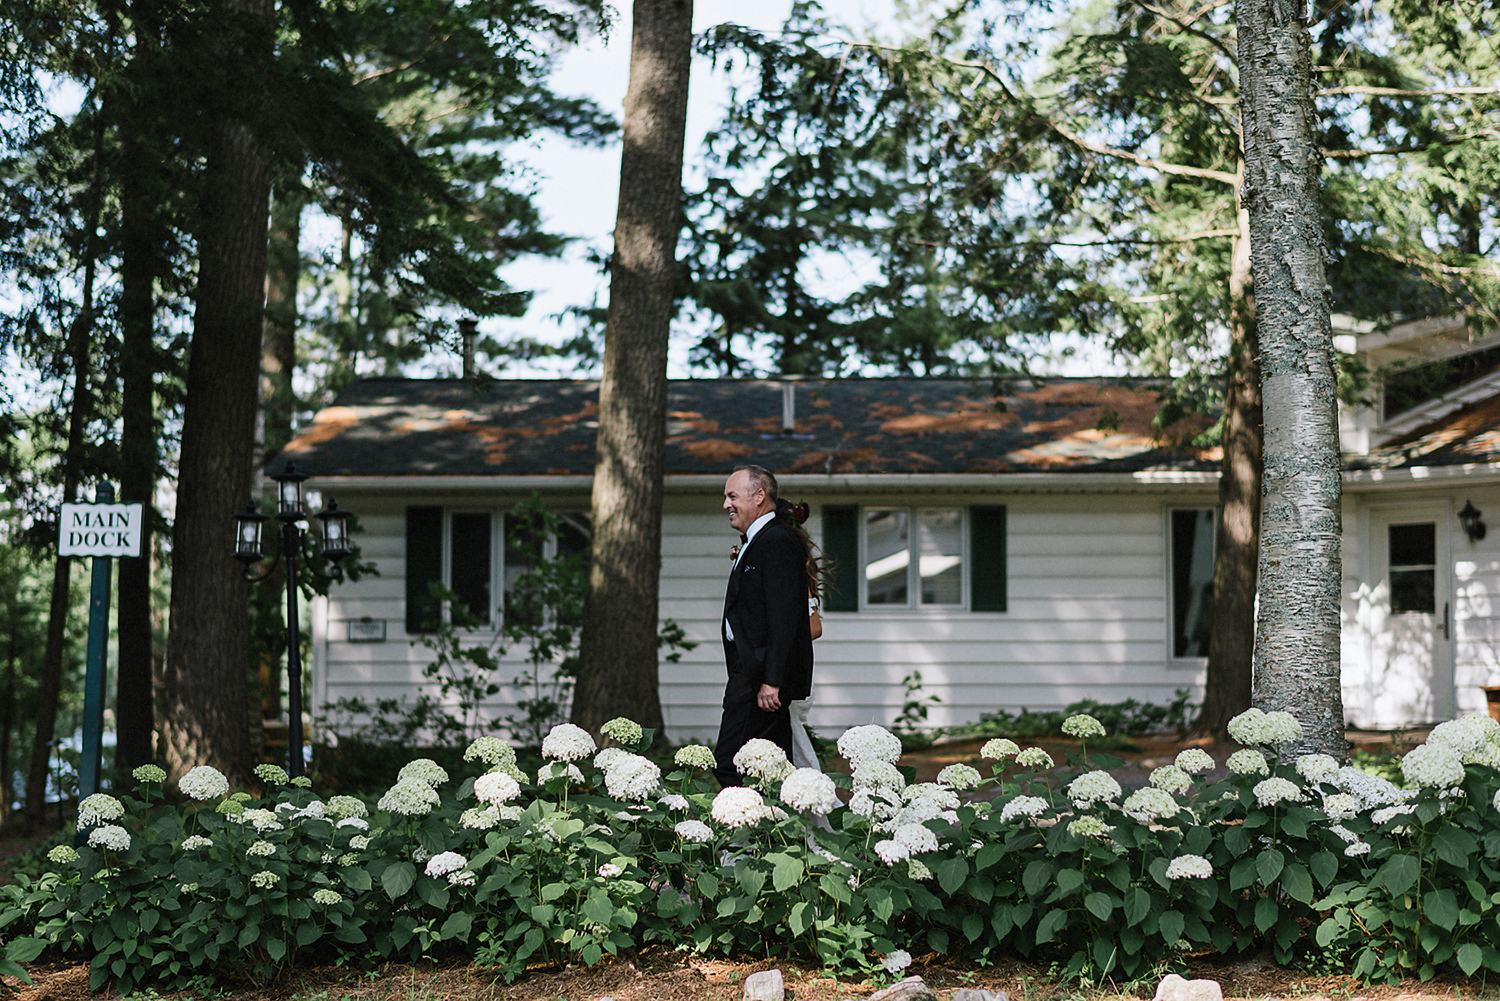 Muskoka-Cottage-Wedding-Photography-Photographer_Photojournalistic-Documentary-Wedding-Photography_Vintage-Bride-Lovers-Land-Dress_Rue-Des-Seins_Forest-Ceremony-Bride-and-father.jpg